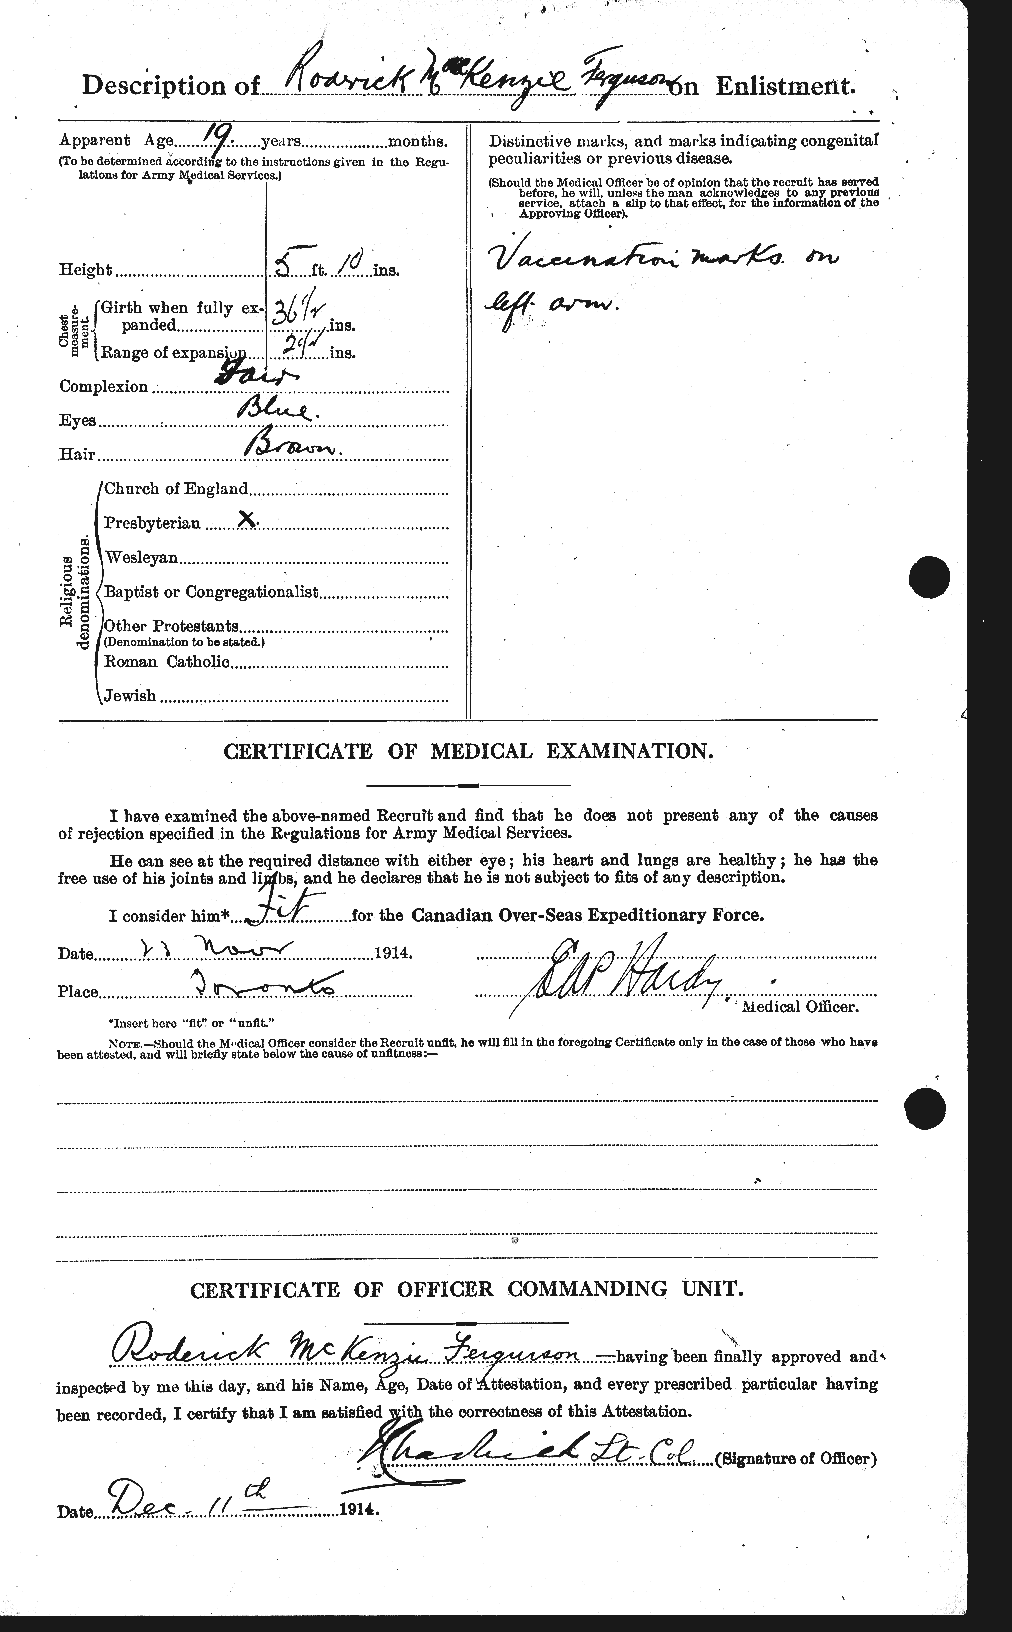 Personnel Records of the First World War - CEF 321267b